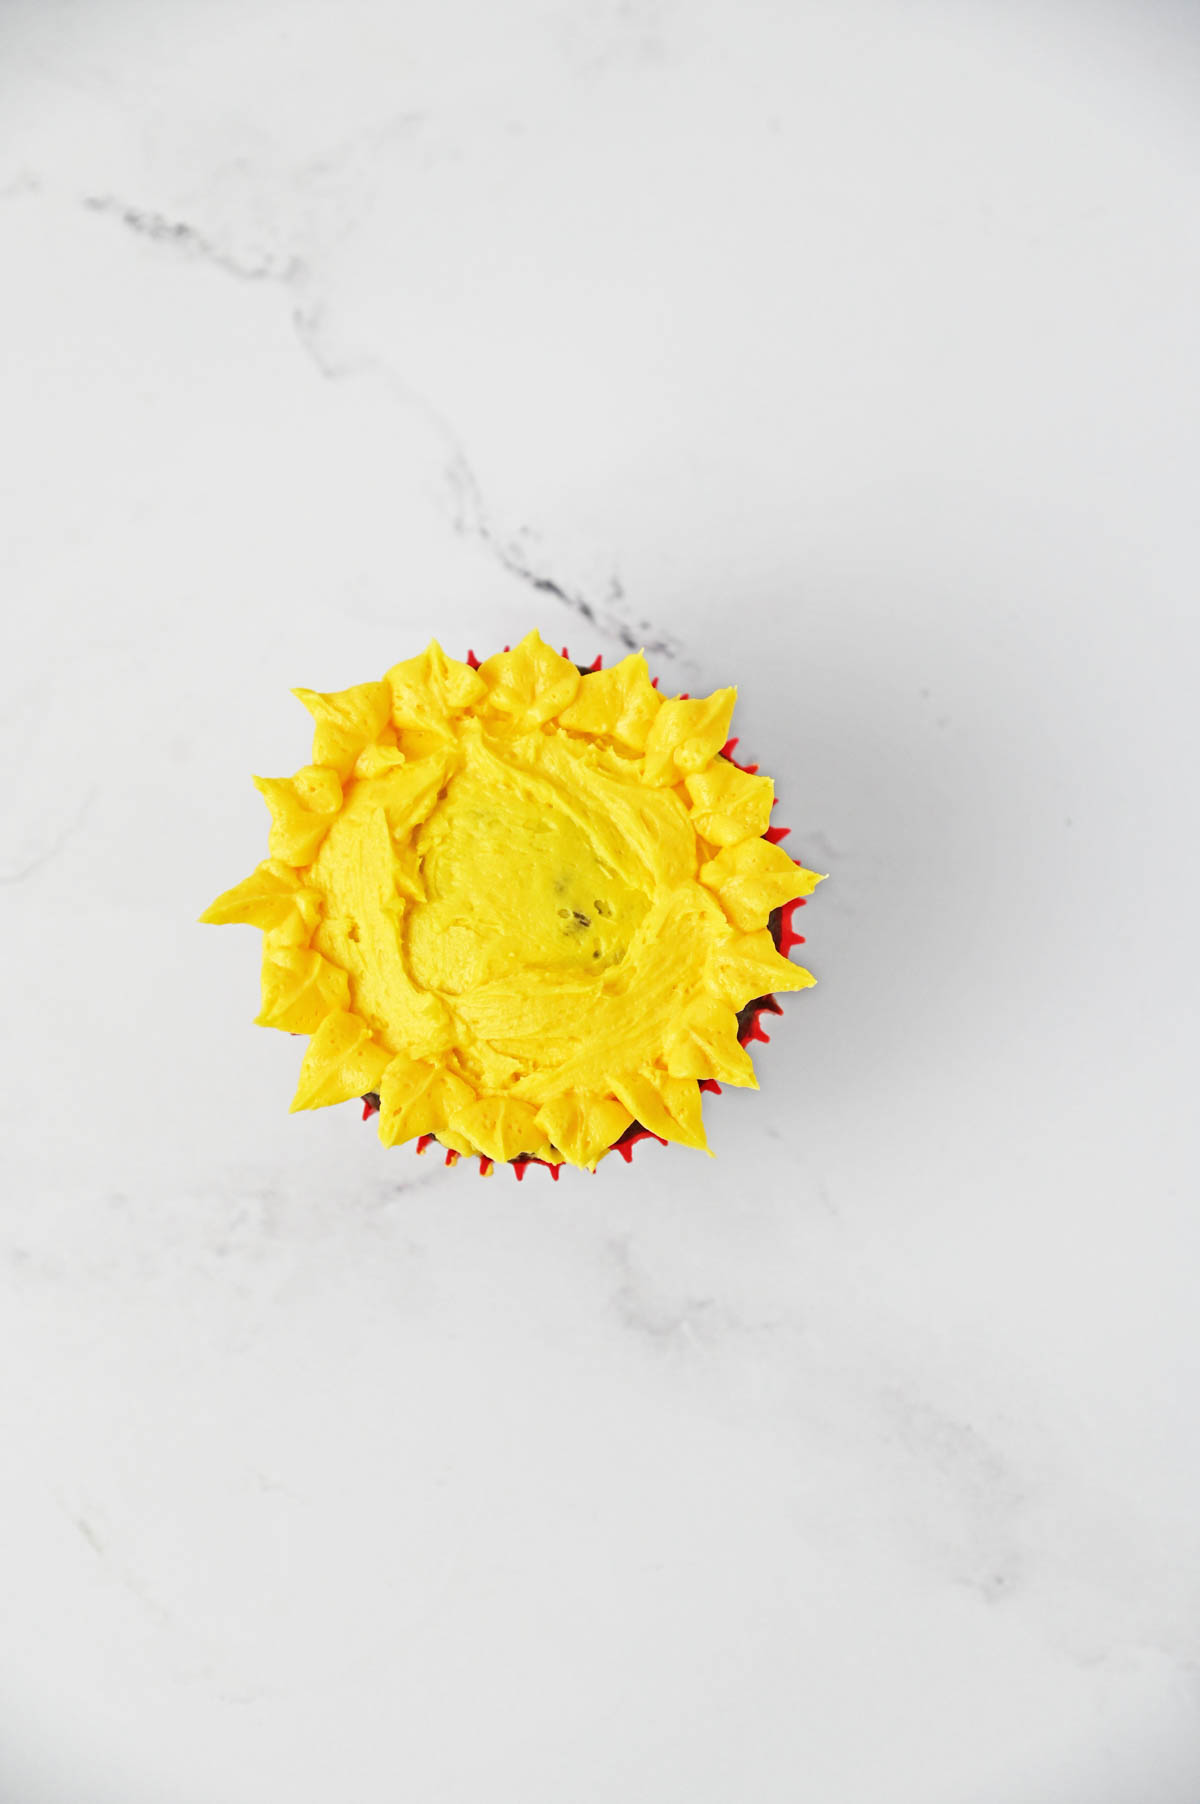 Outer petals of sunflower made with icing